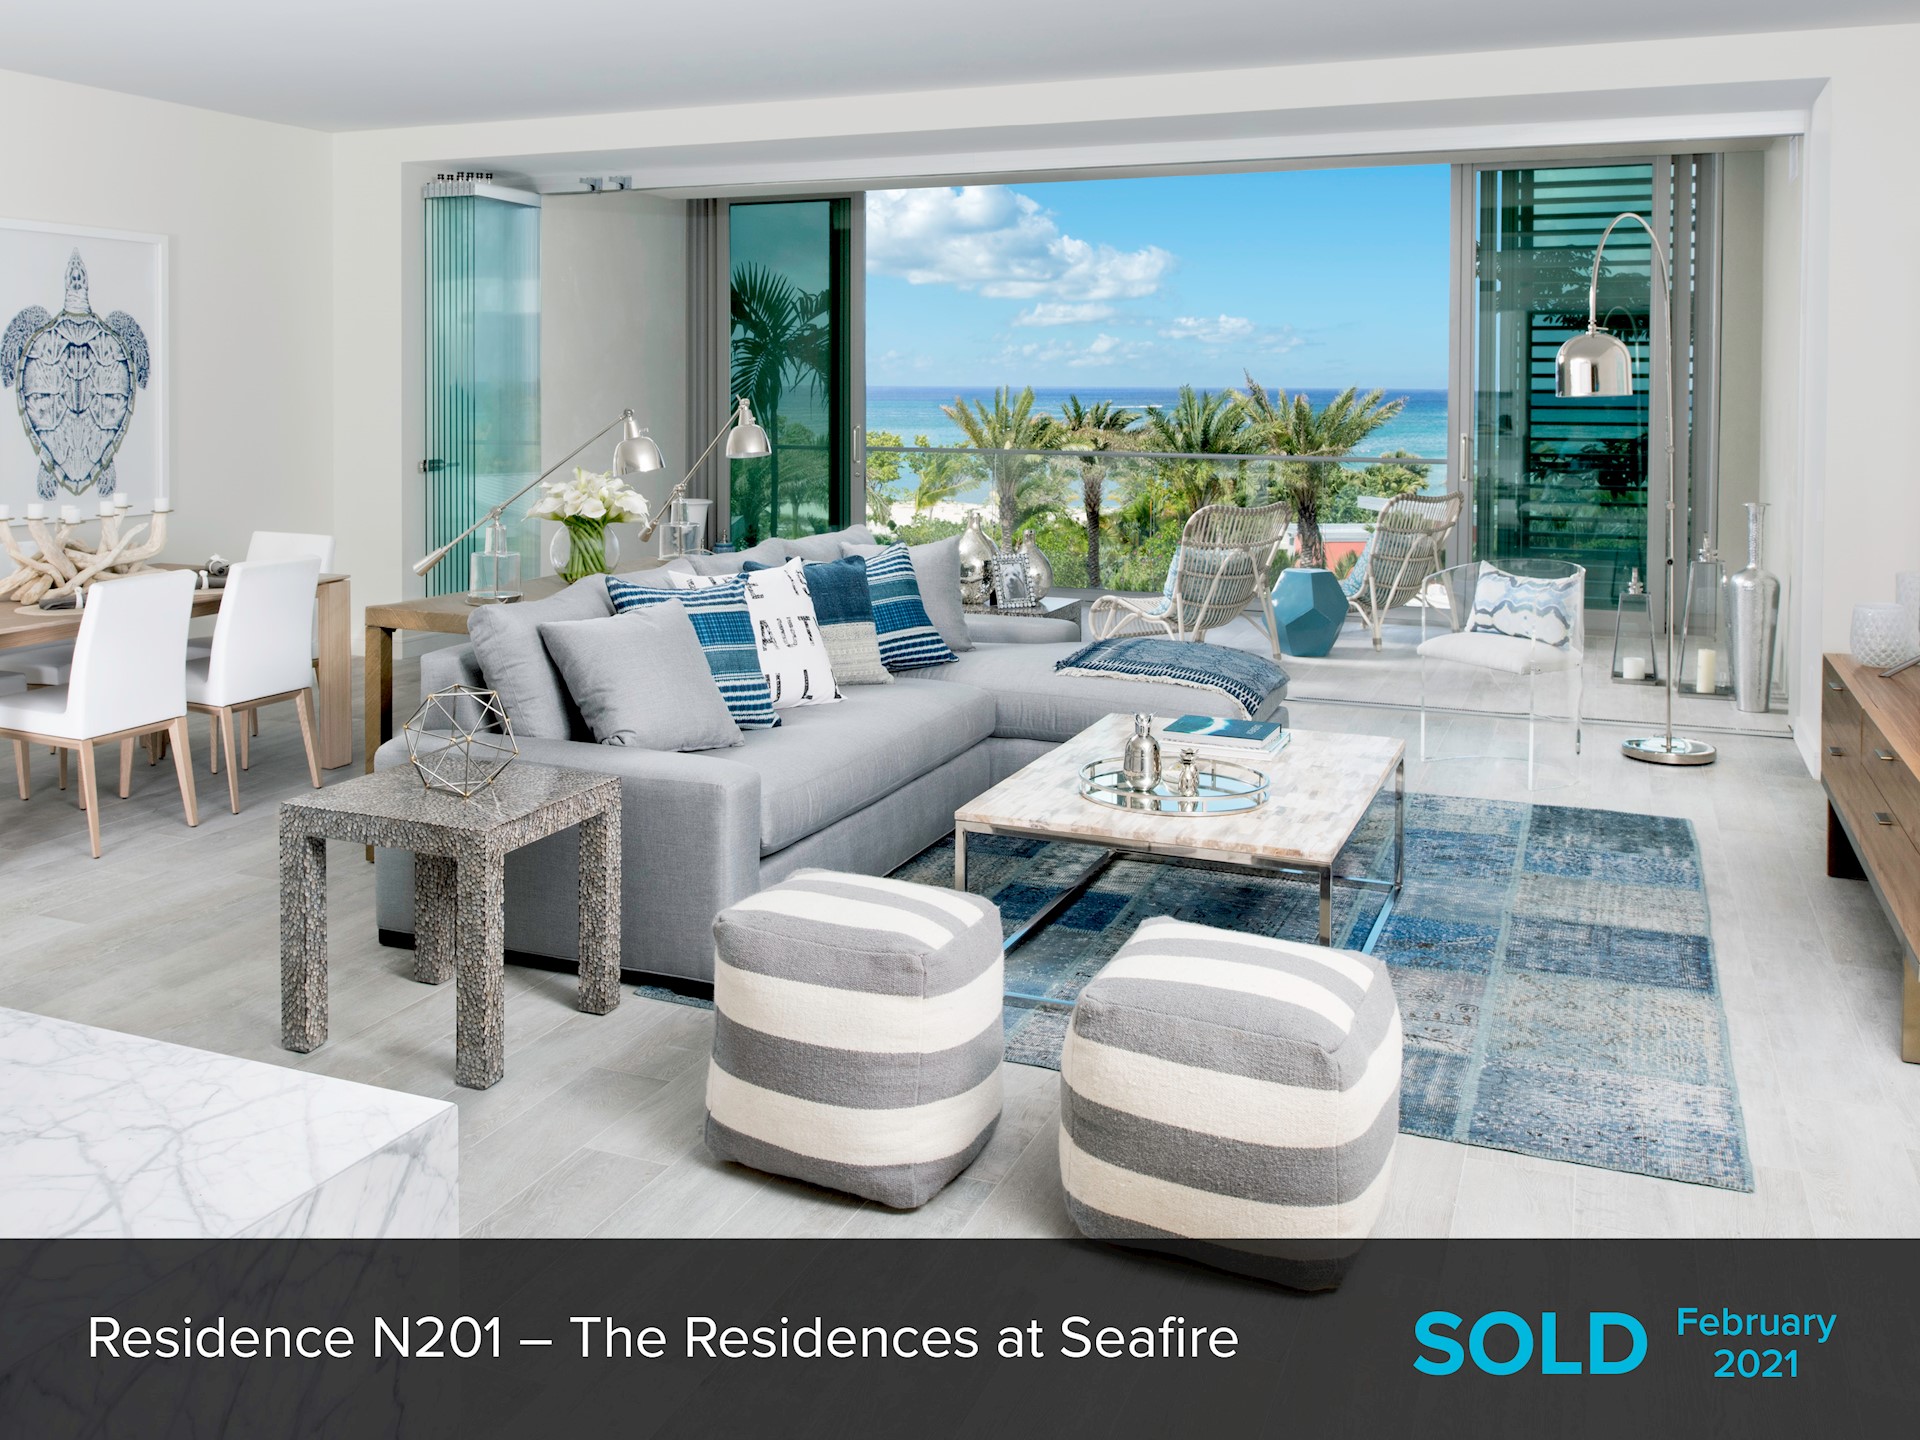 The Residences at Seafire